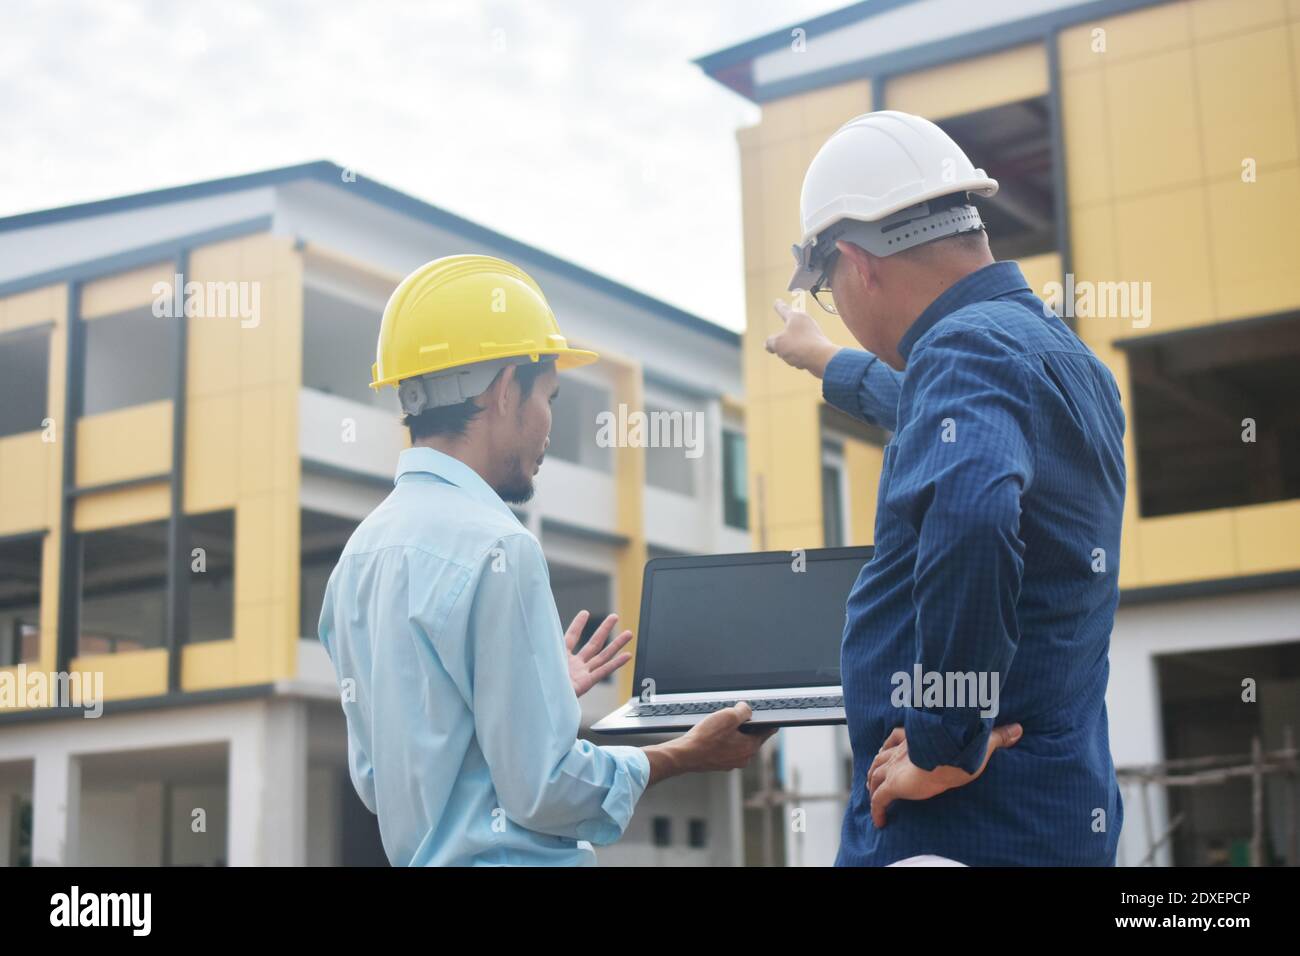 Two Engineering use computer notebook presentation at work place building estate construction background Stock Photo